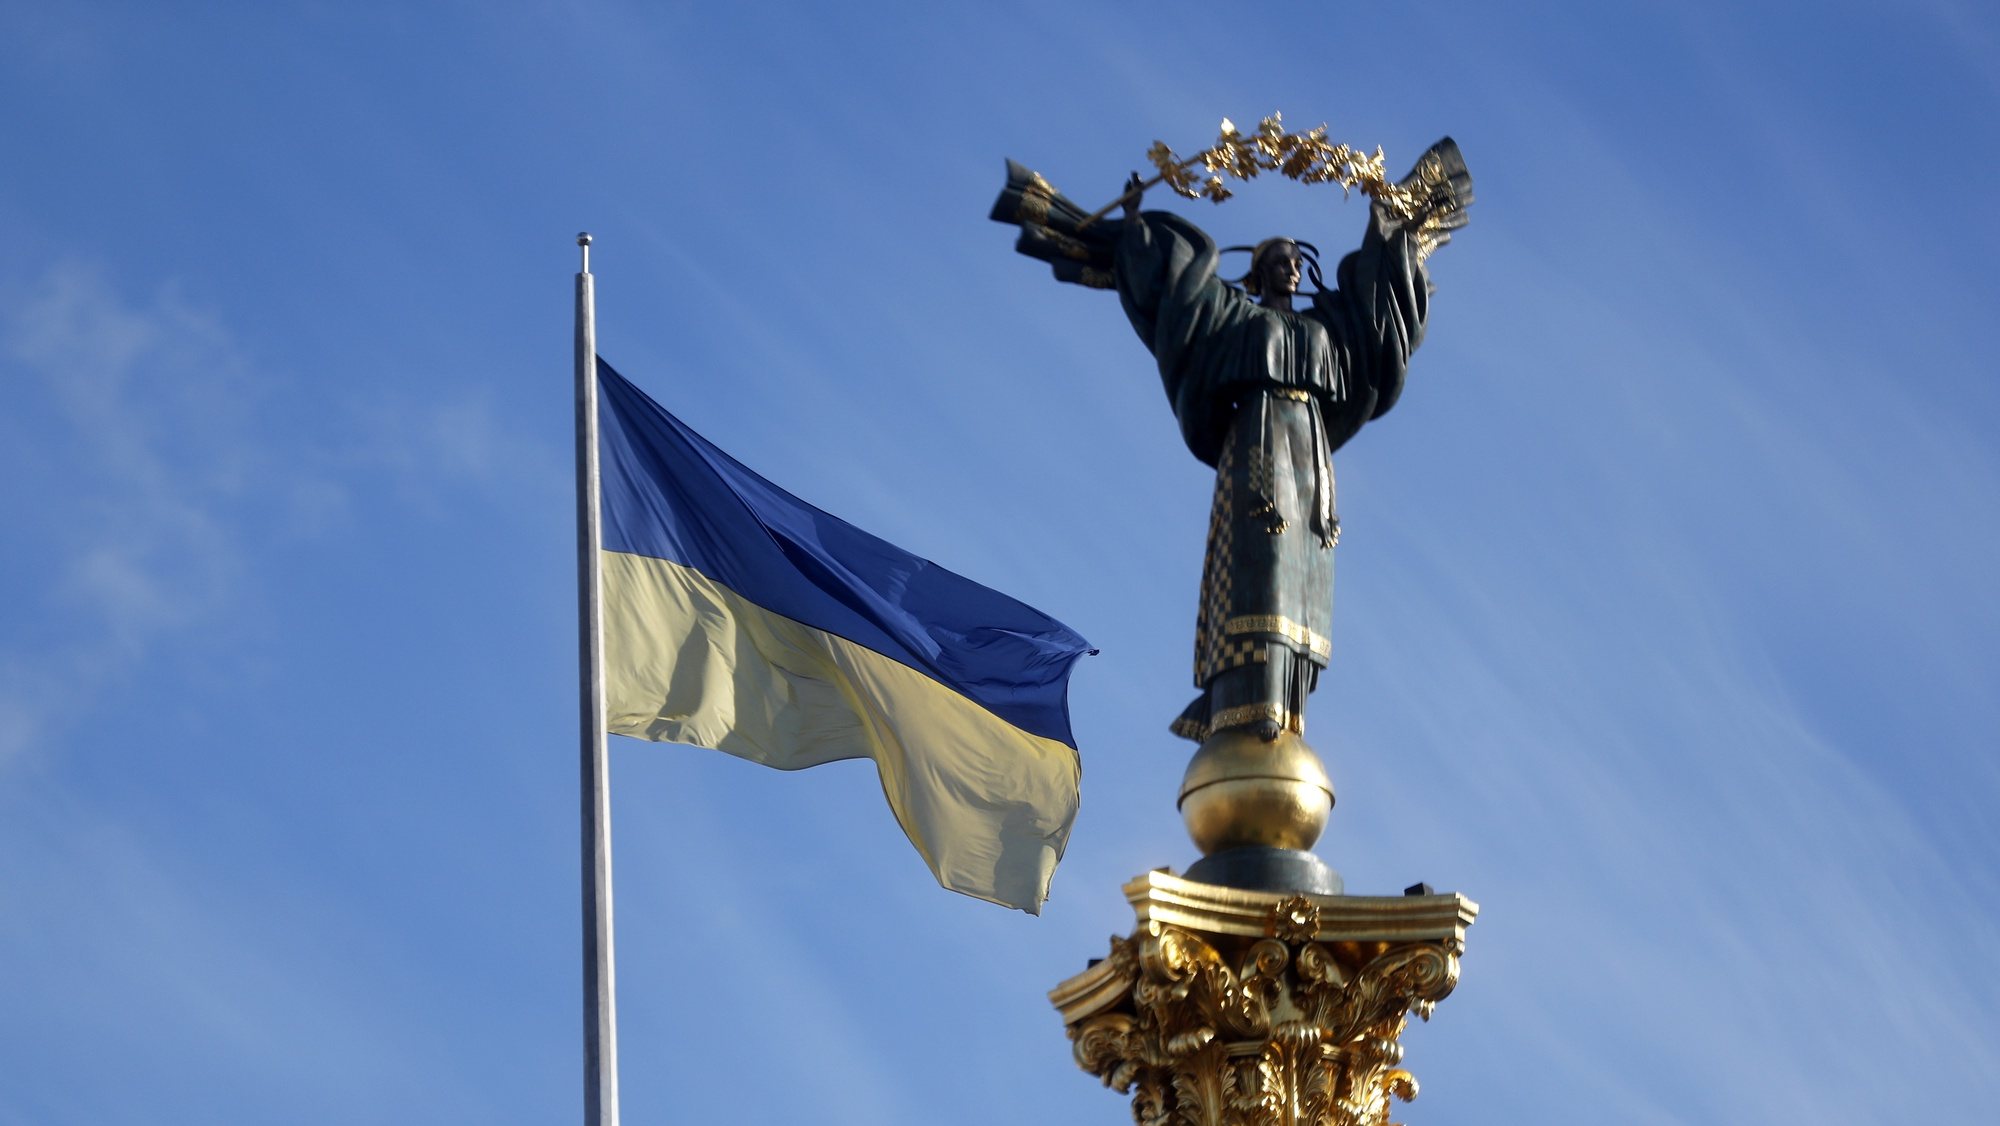 epa09786831 A national flag waves in front of the Independence monument in the central square of Kiev, Ukraine, 26 February 2022. Russian troops launched a major military operation on Ukraine on 24 February, after weeks of intense diplomacy and the imposition of Western sanctions on Russia aimed at preventing an armed conflict in Ukraine. Martial law was introduced in Ukraine, with explosions heard in many cities, including Kiev.  EPA/ZURAB KURTSIKIDZE